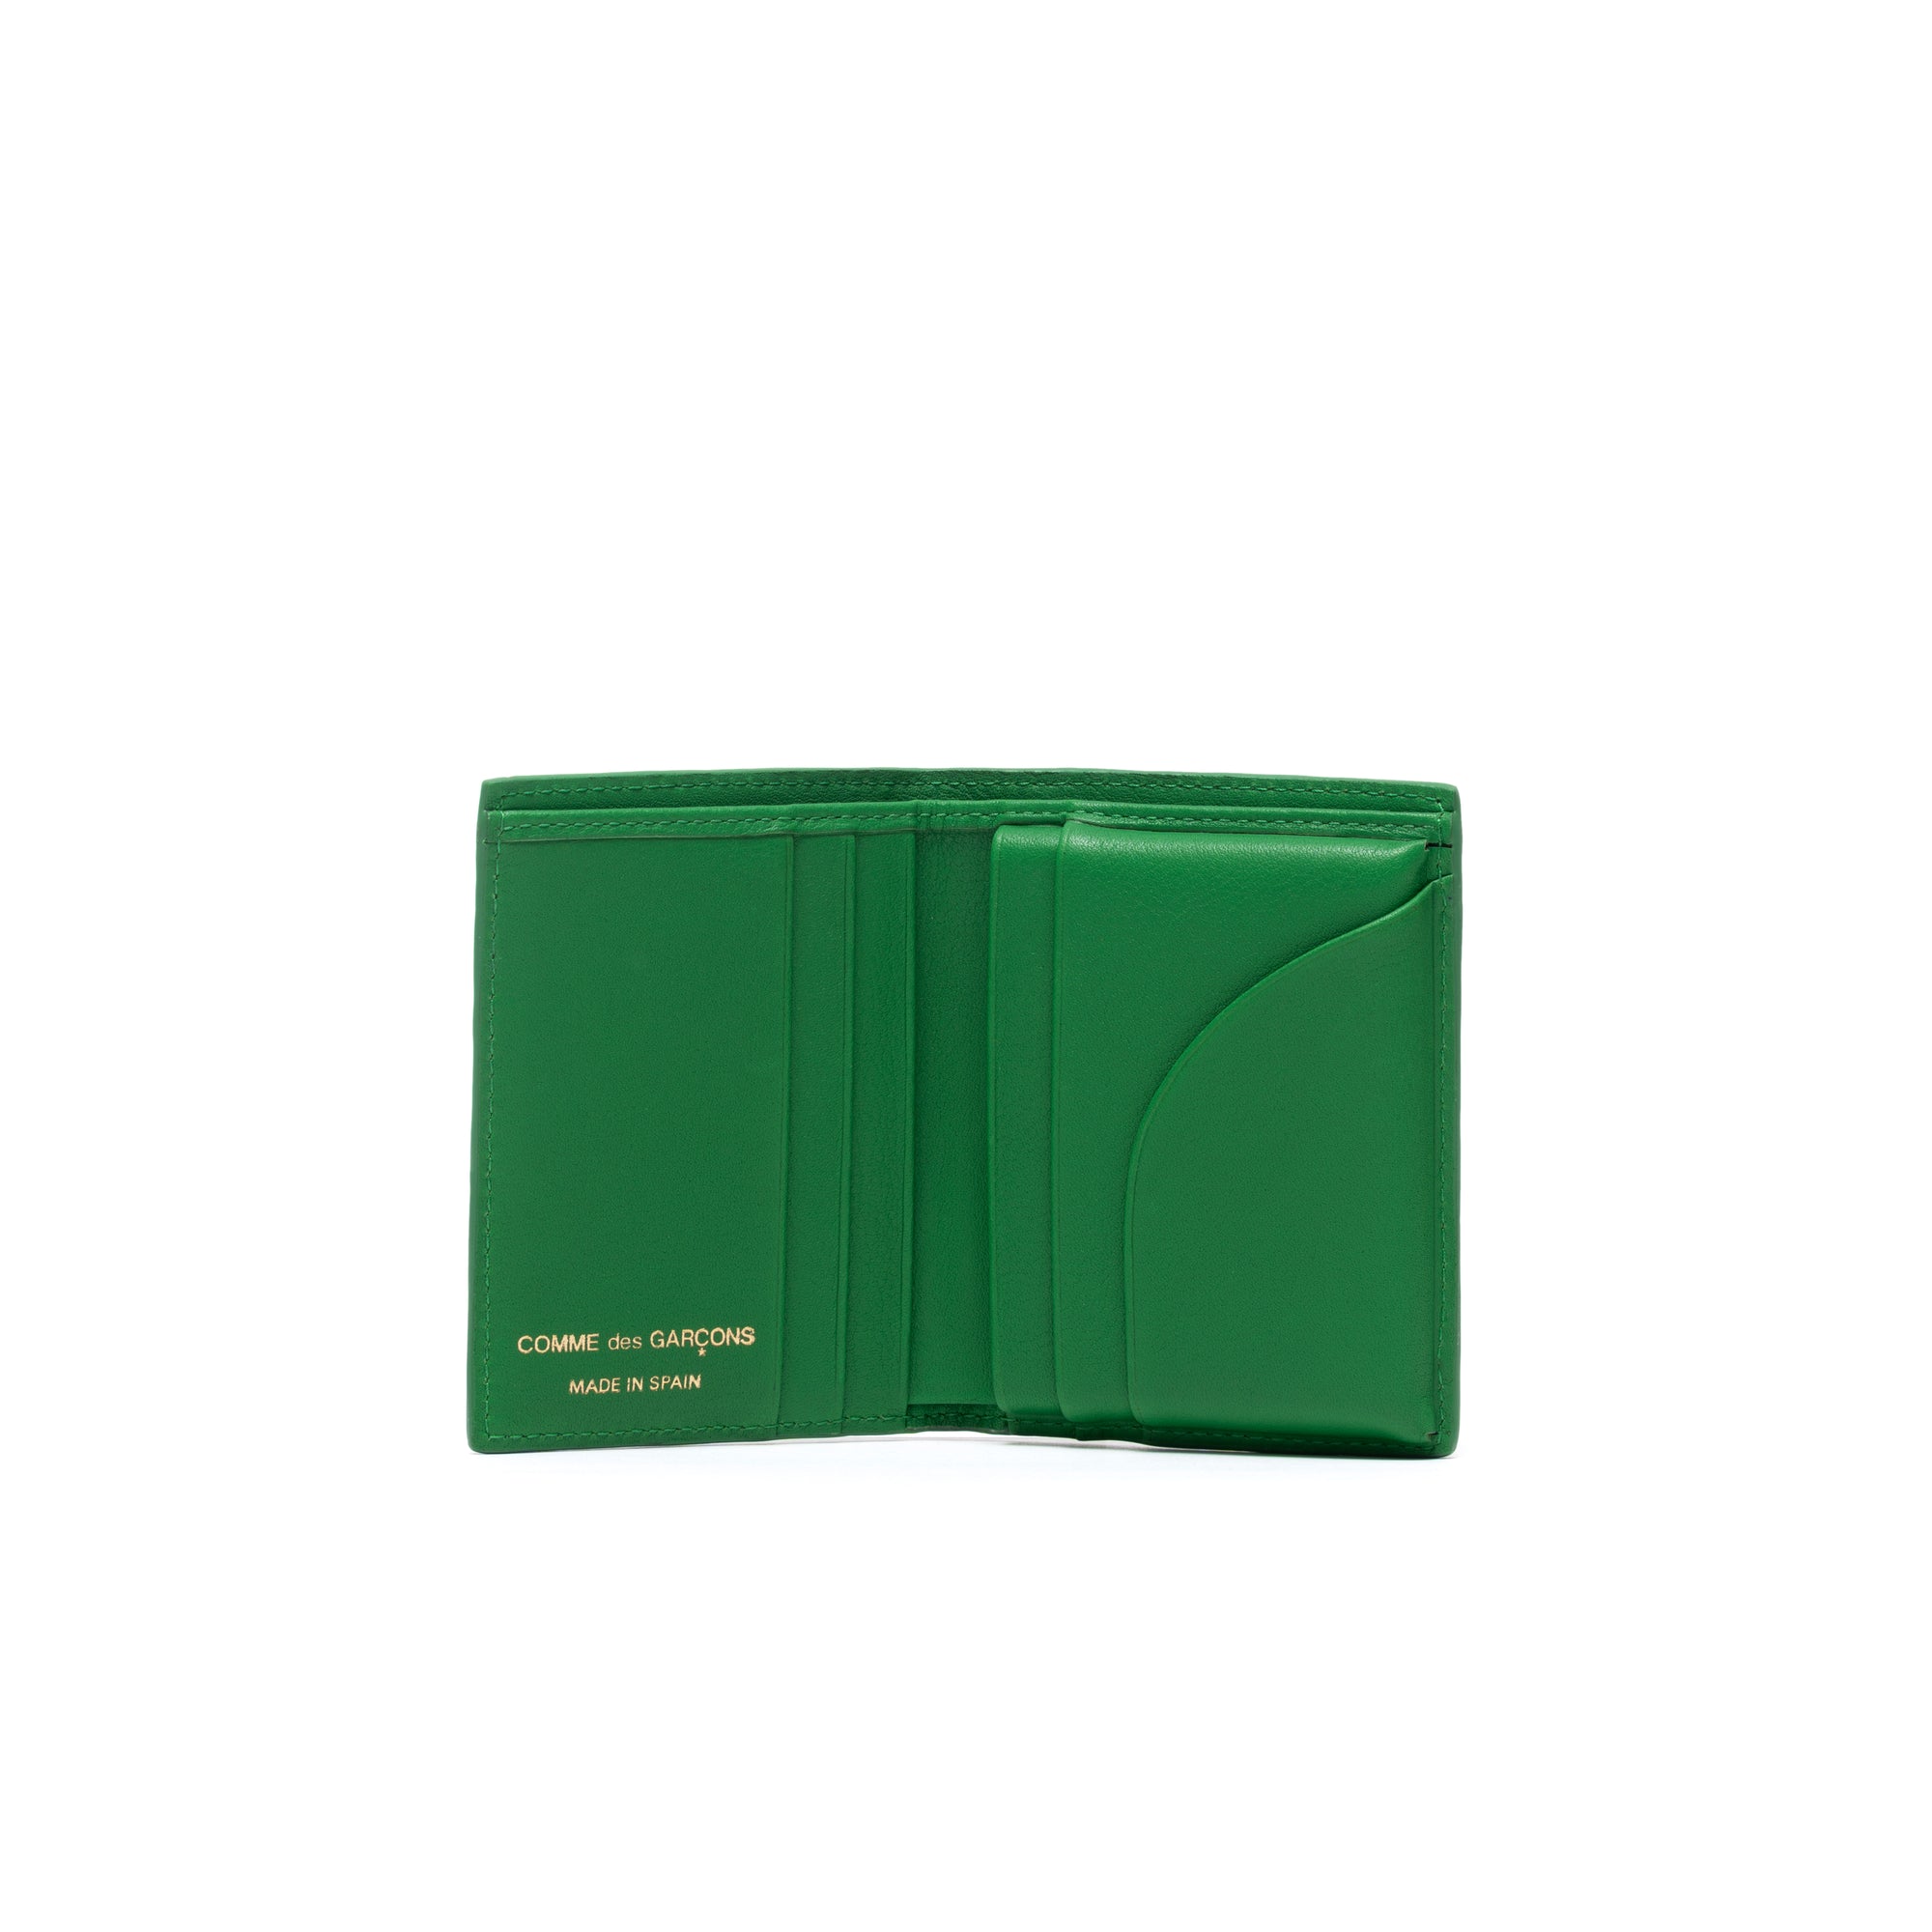 CDG WALLET - Embossed Forest (SA0641 Green) view 3